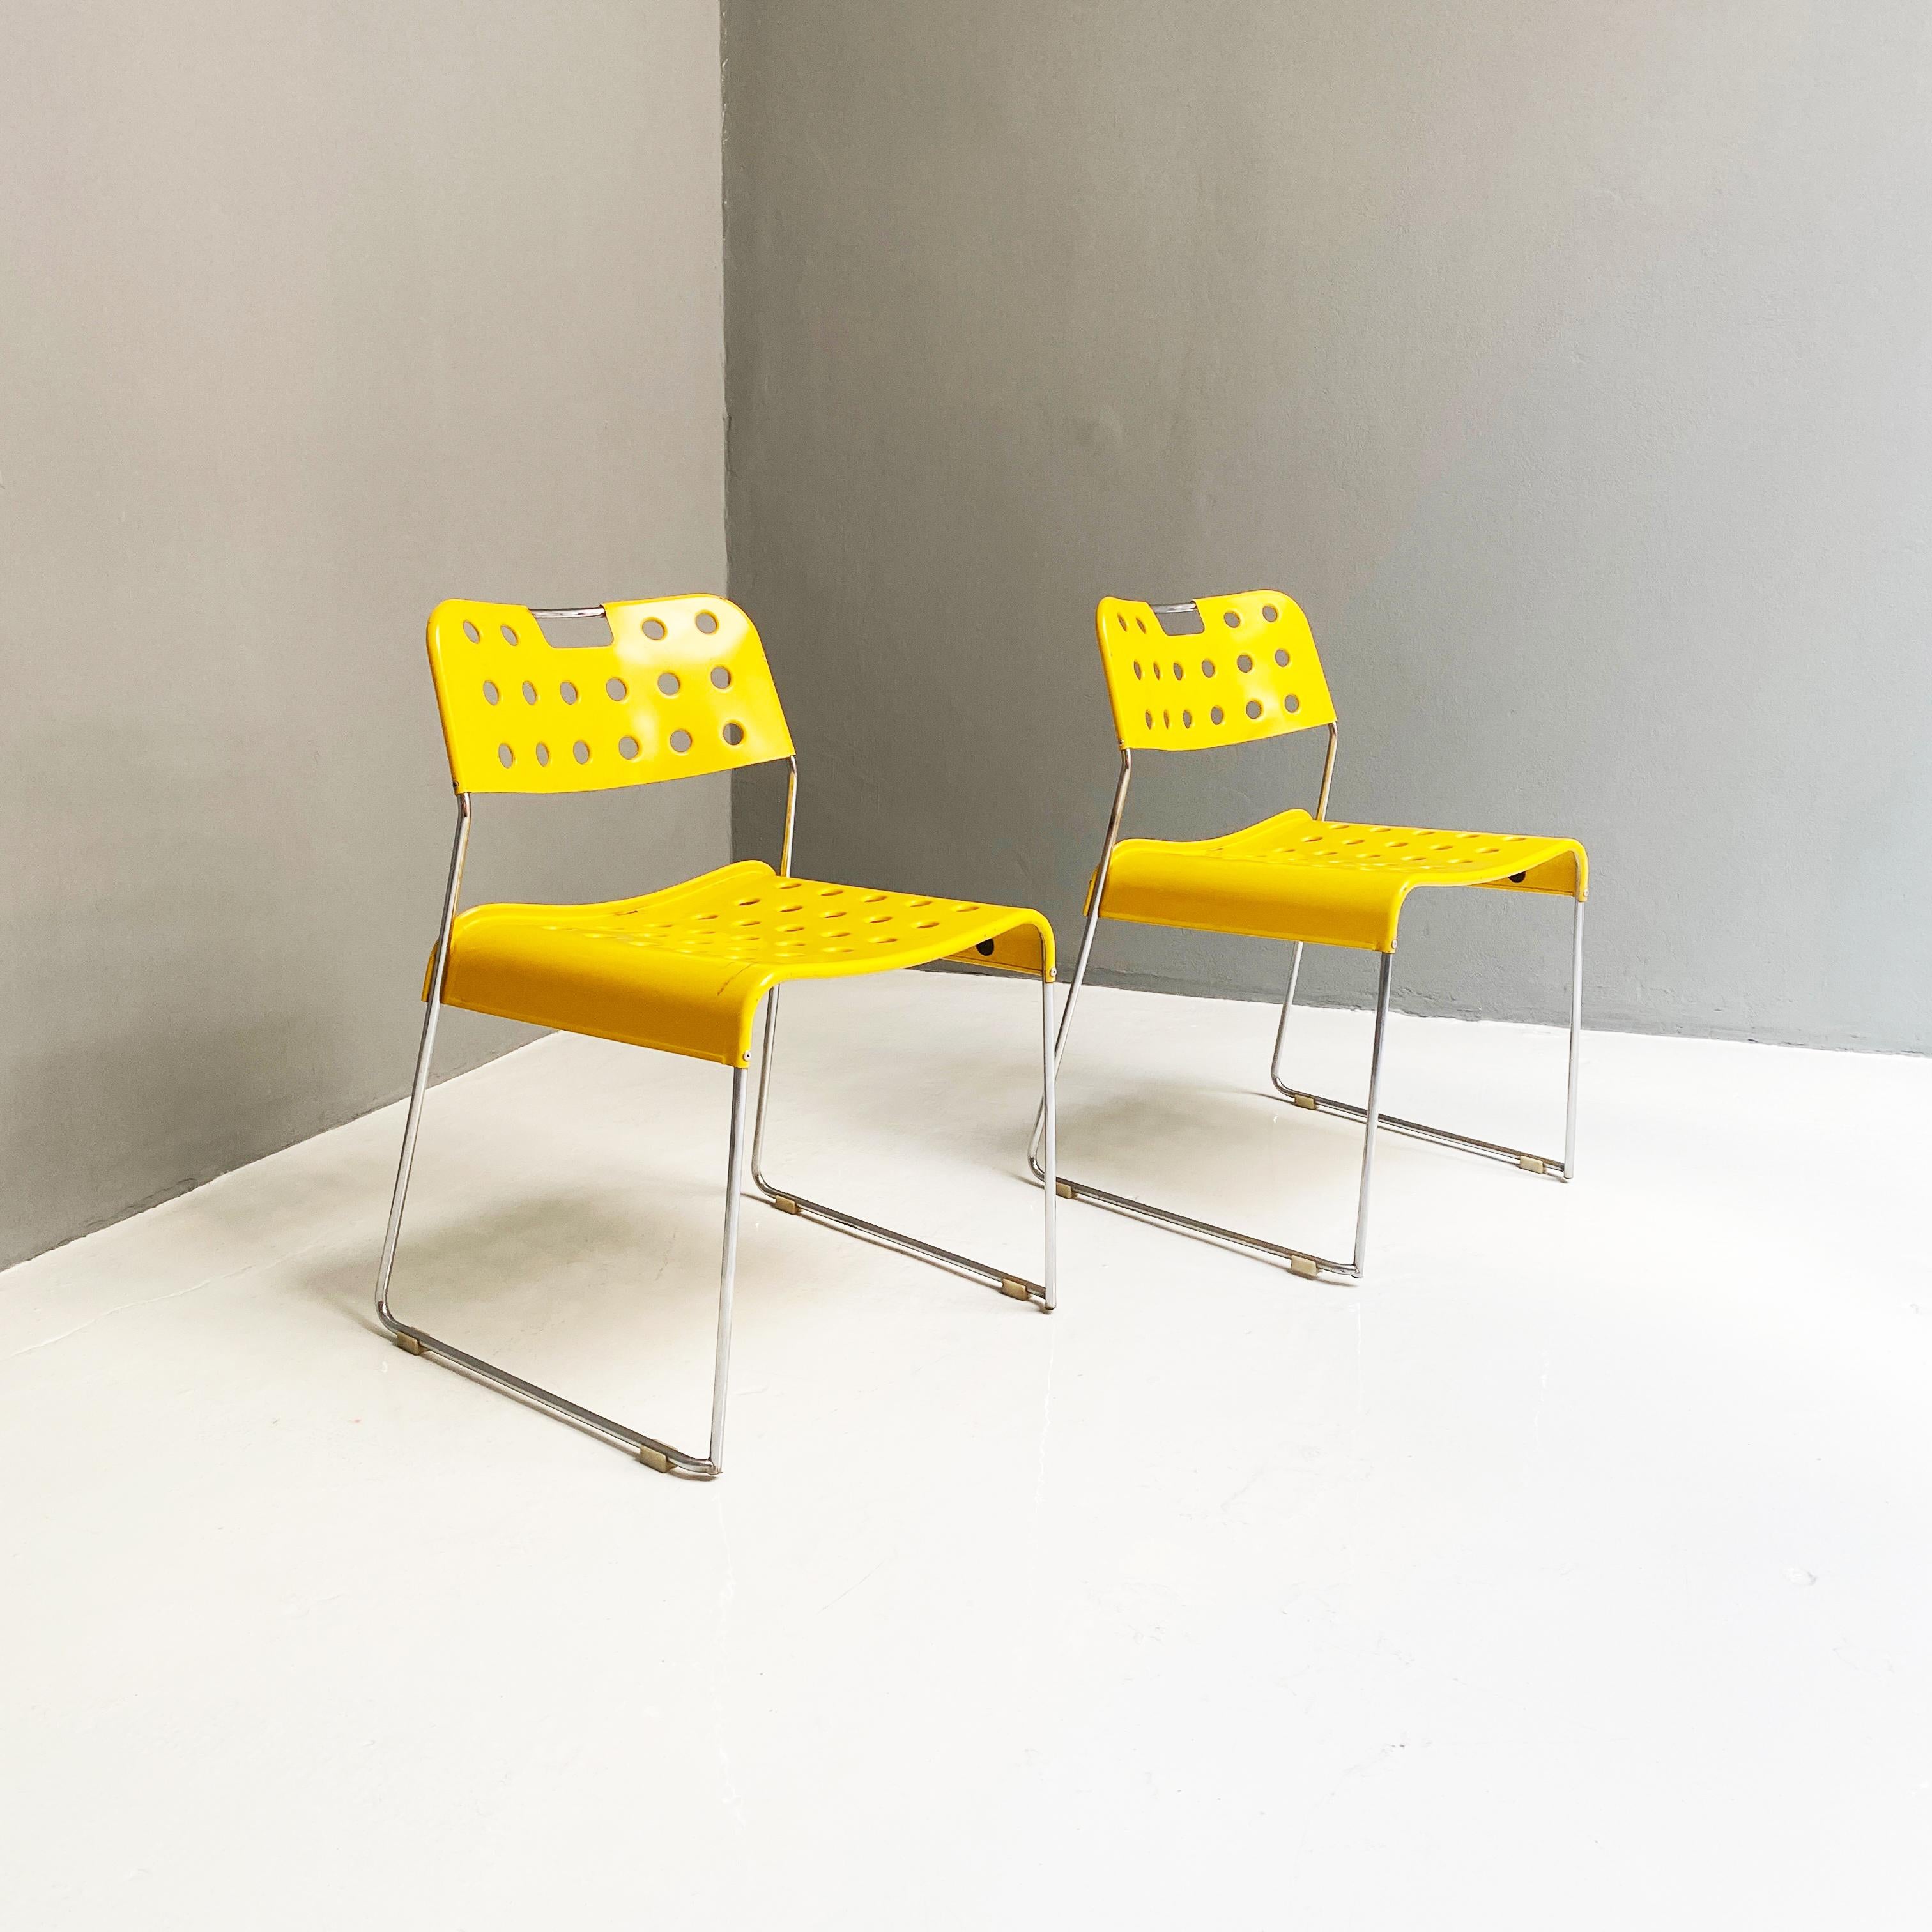 Yellow chairs Omstak by Rodney Kinsman for Bieffeplast, 1970s 
Stackable chairs Omstak model, with structure in steel rod and seats with circular holes in yellow metal. Designed by Rodney Kinsman for Bieffeplast in the 1970s.

Good structural